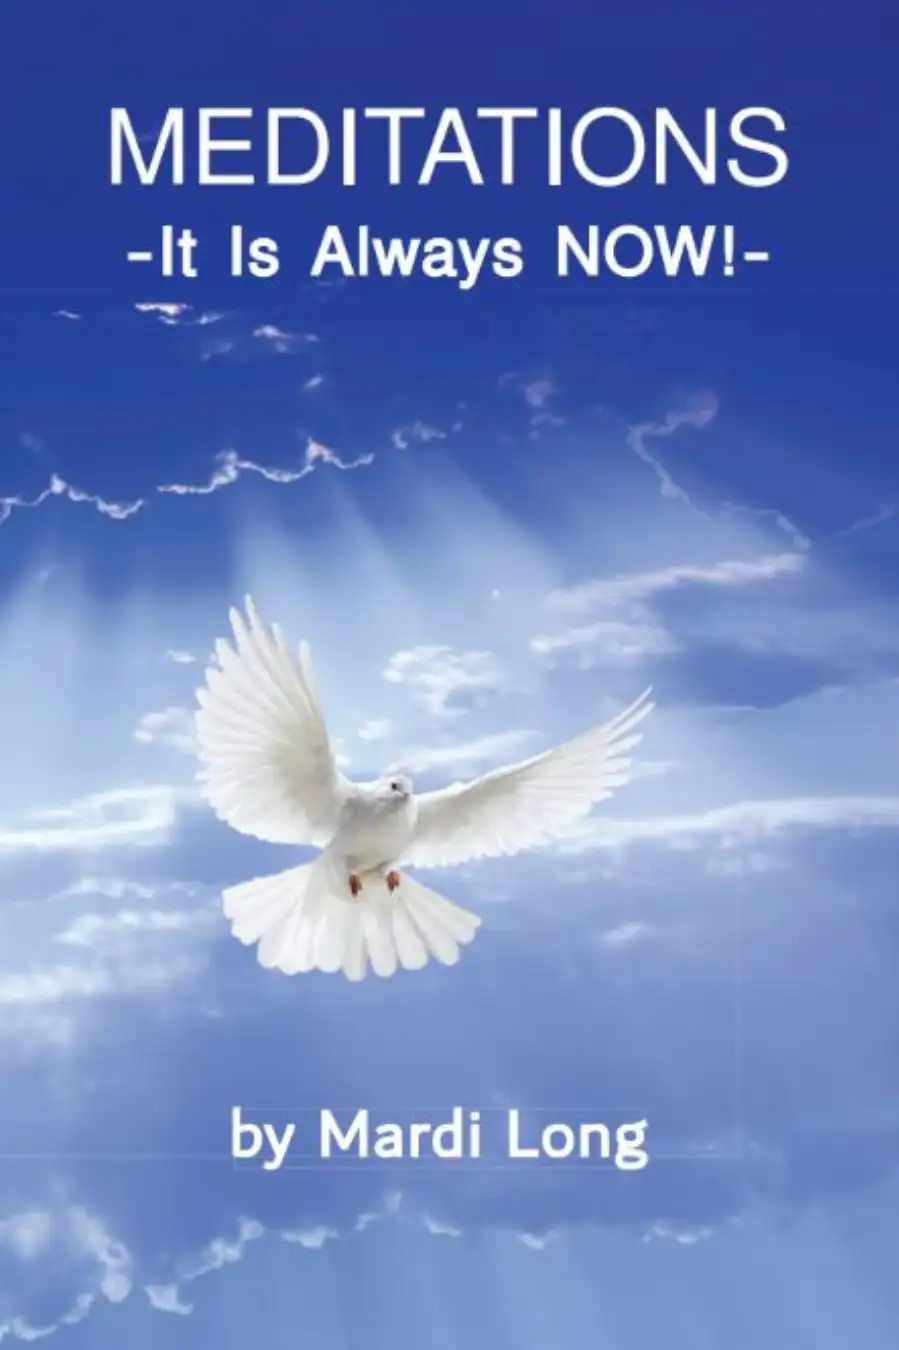 Meditations - It Is Always NOW!  Image